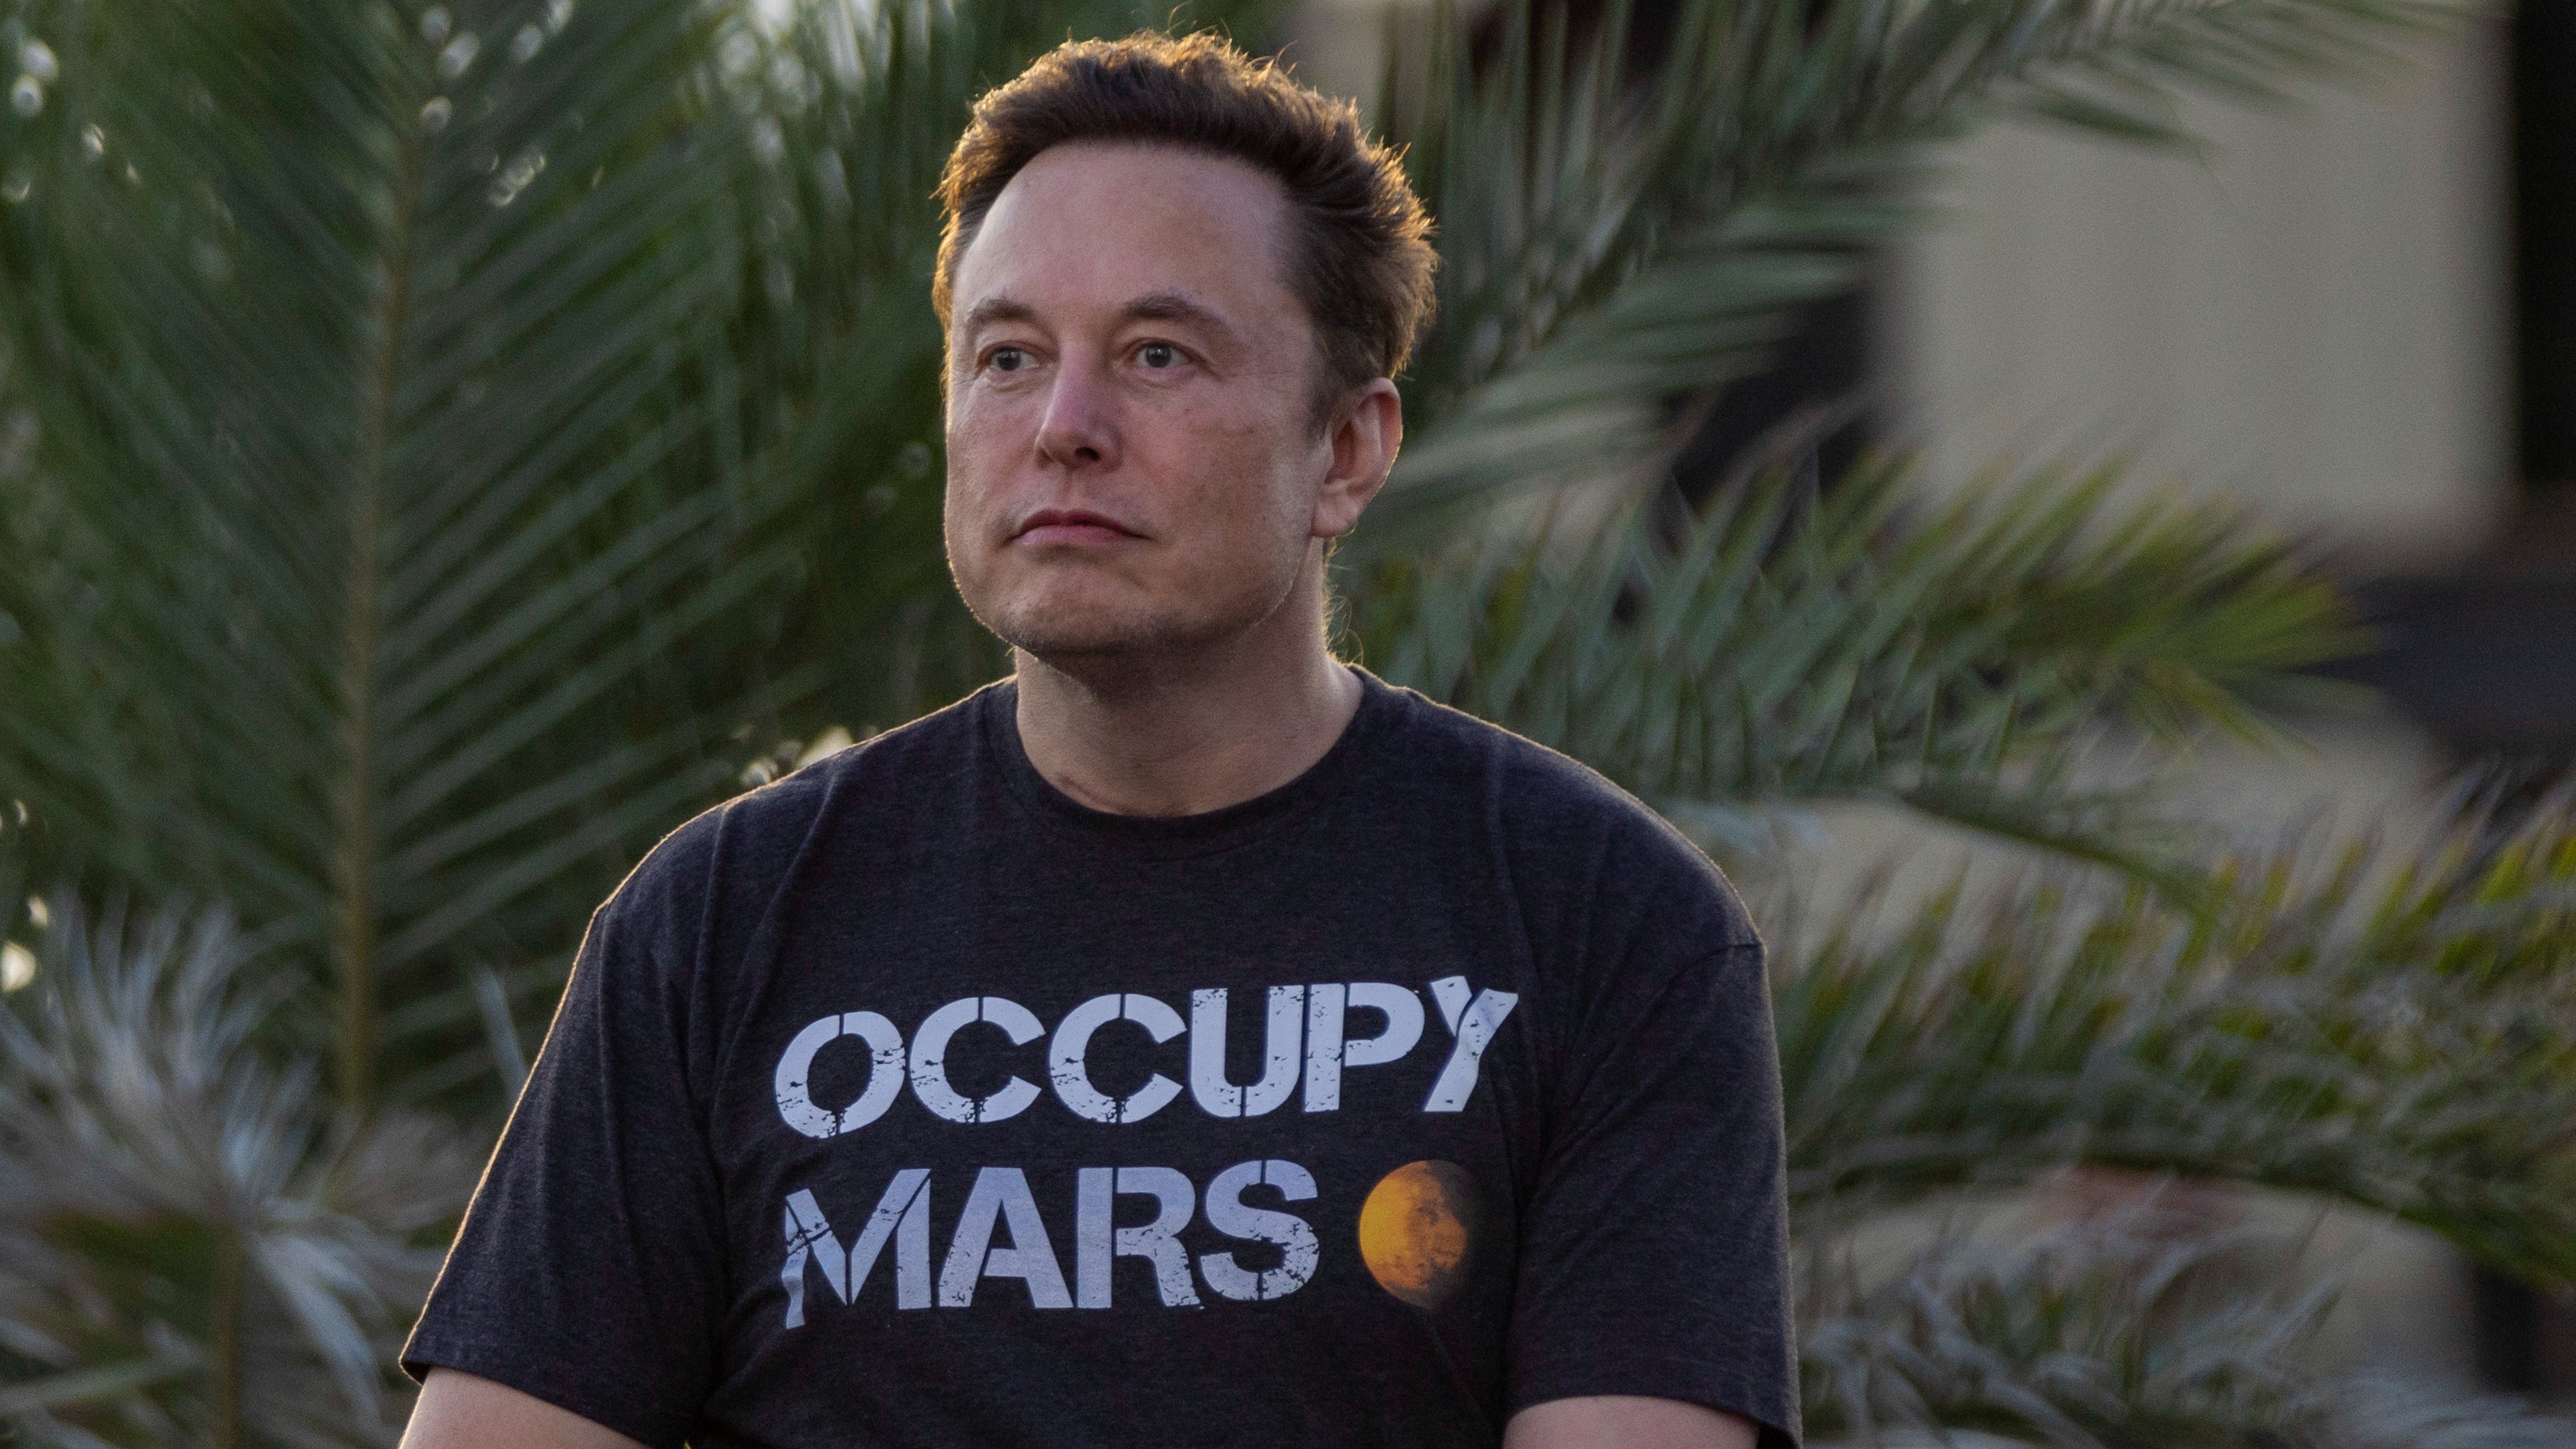 NASA confident in SpaceX after raucous Twitter takeover by Elon Musk: report